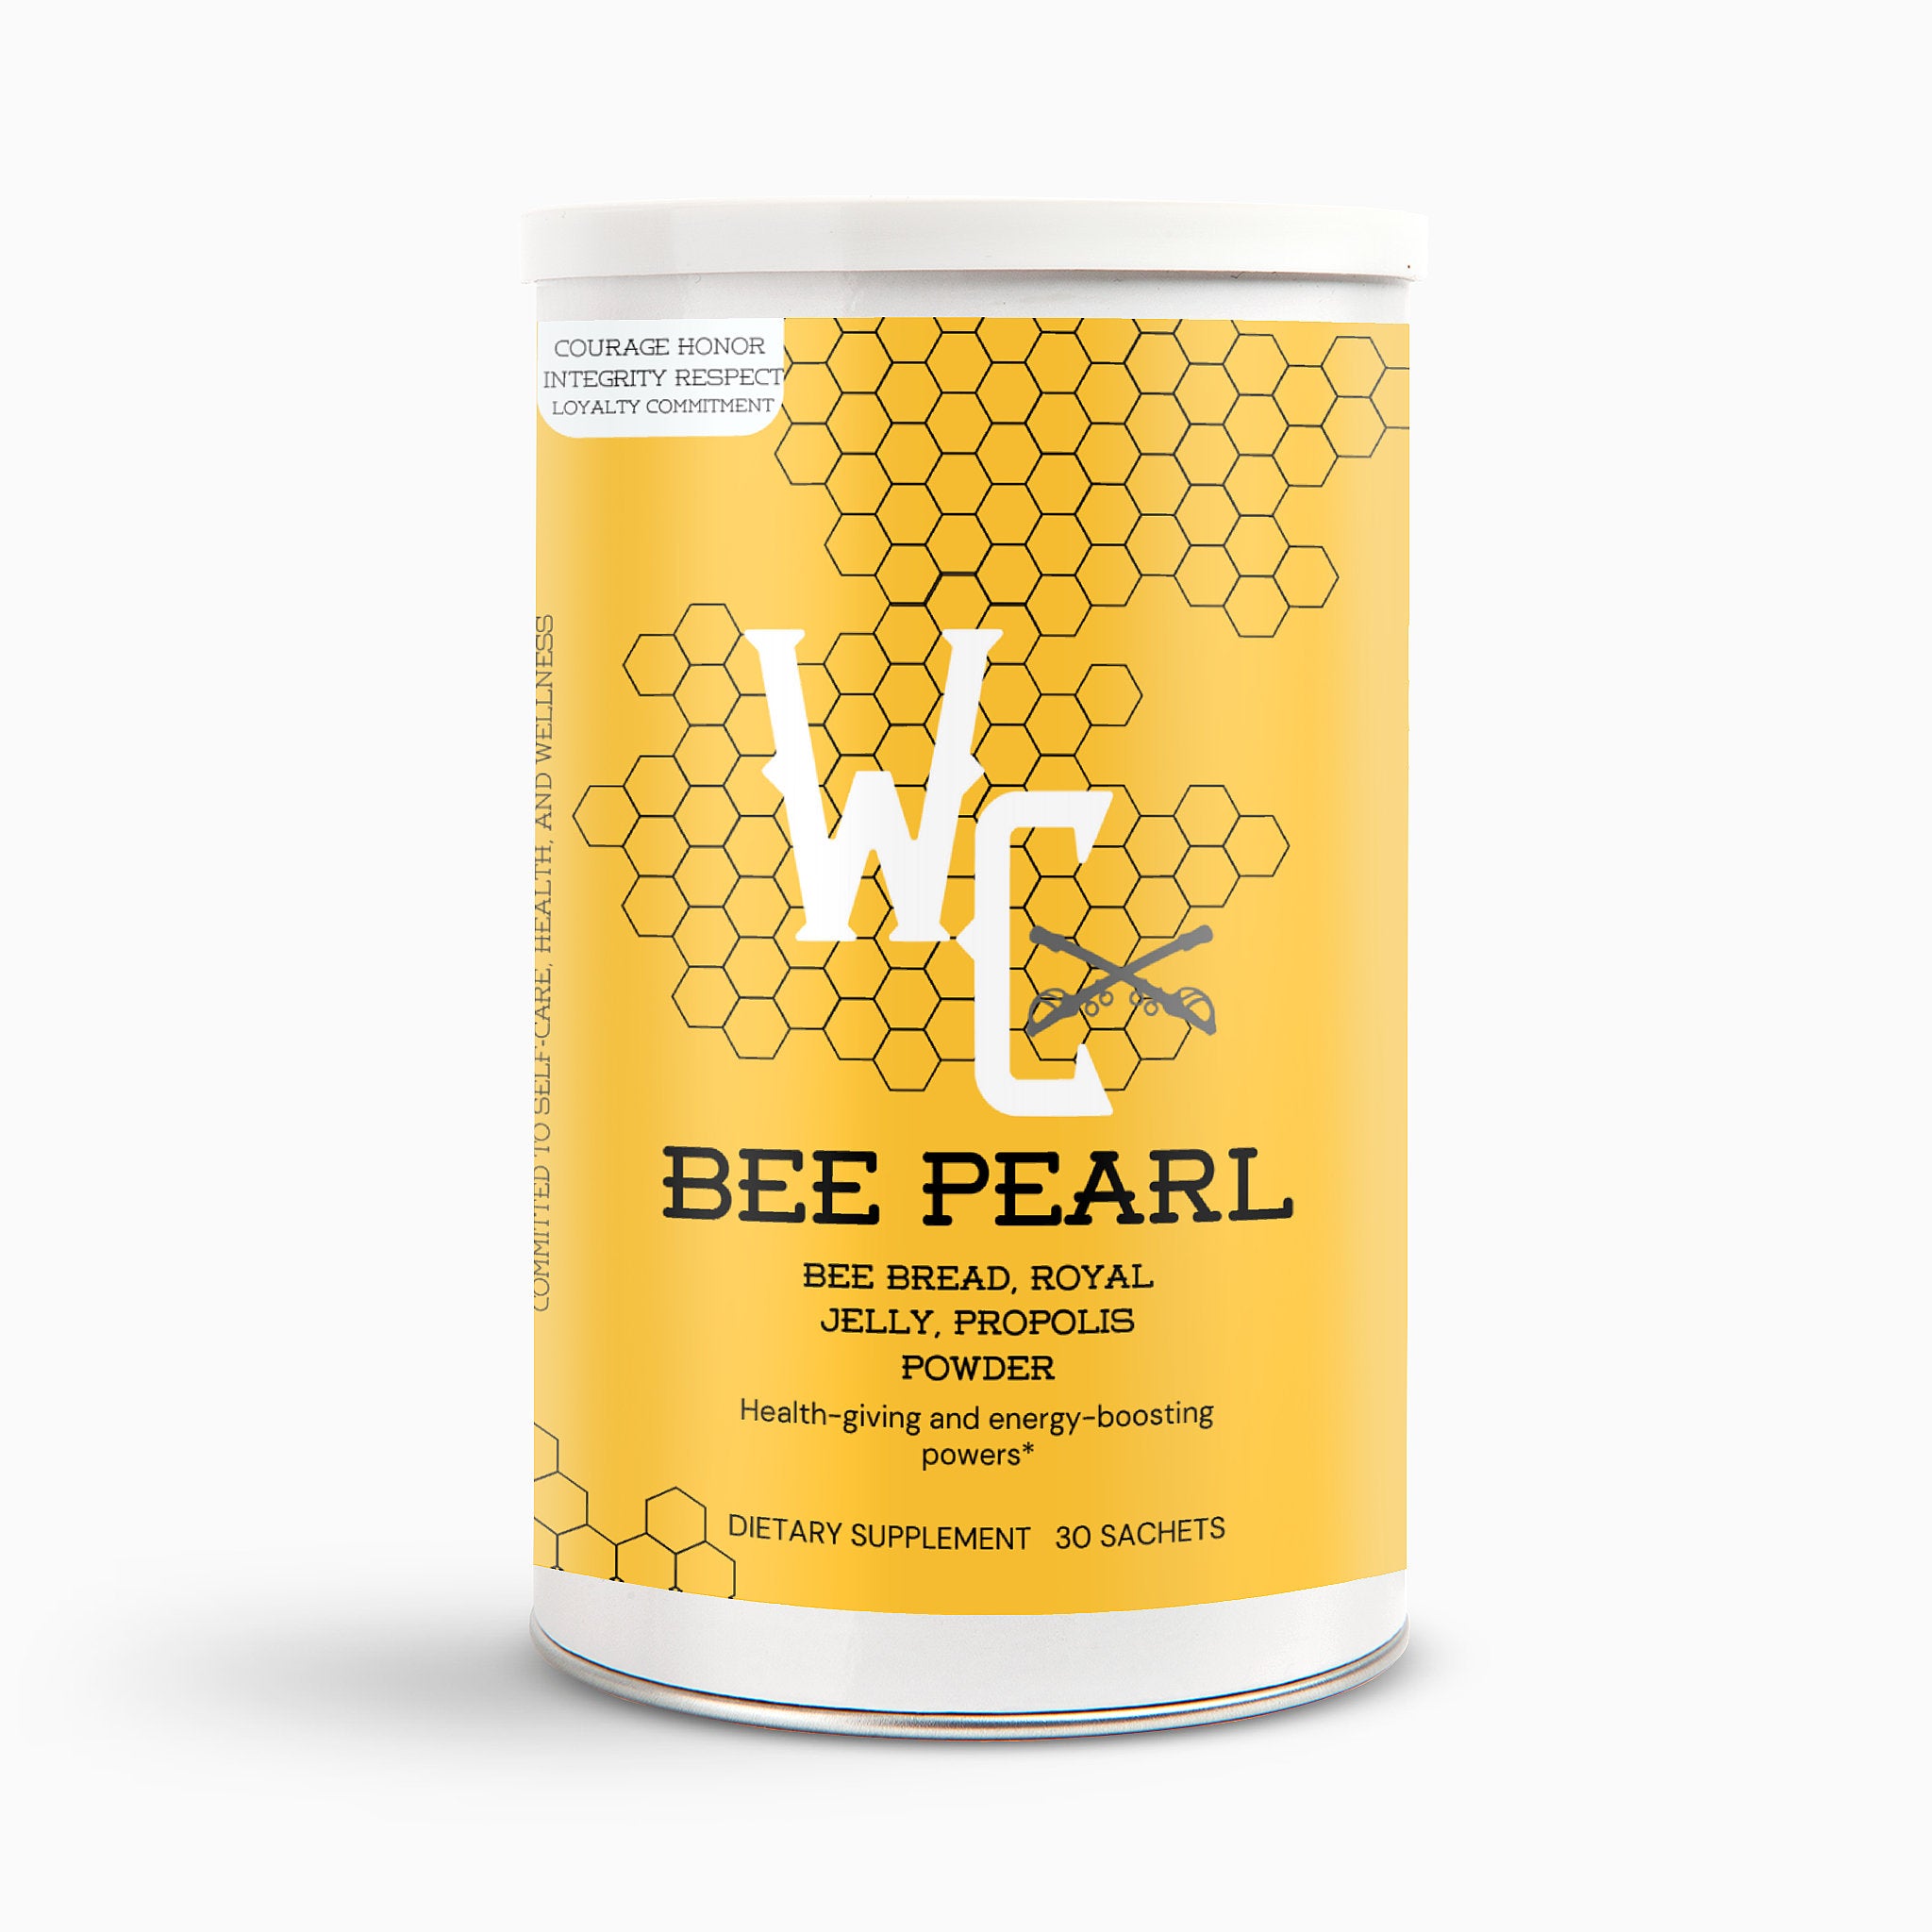 Bee Pearl Powder – The Warriors Collection Brand